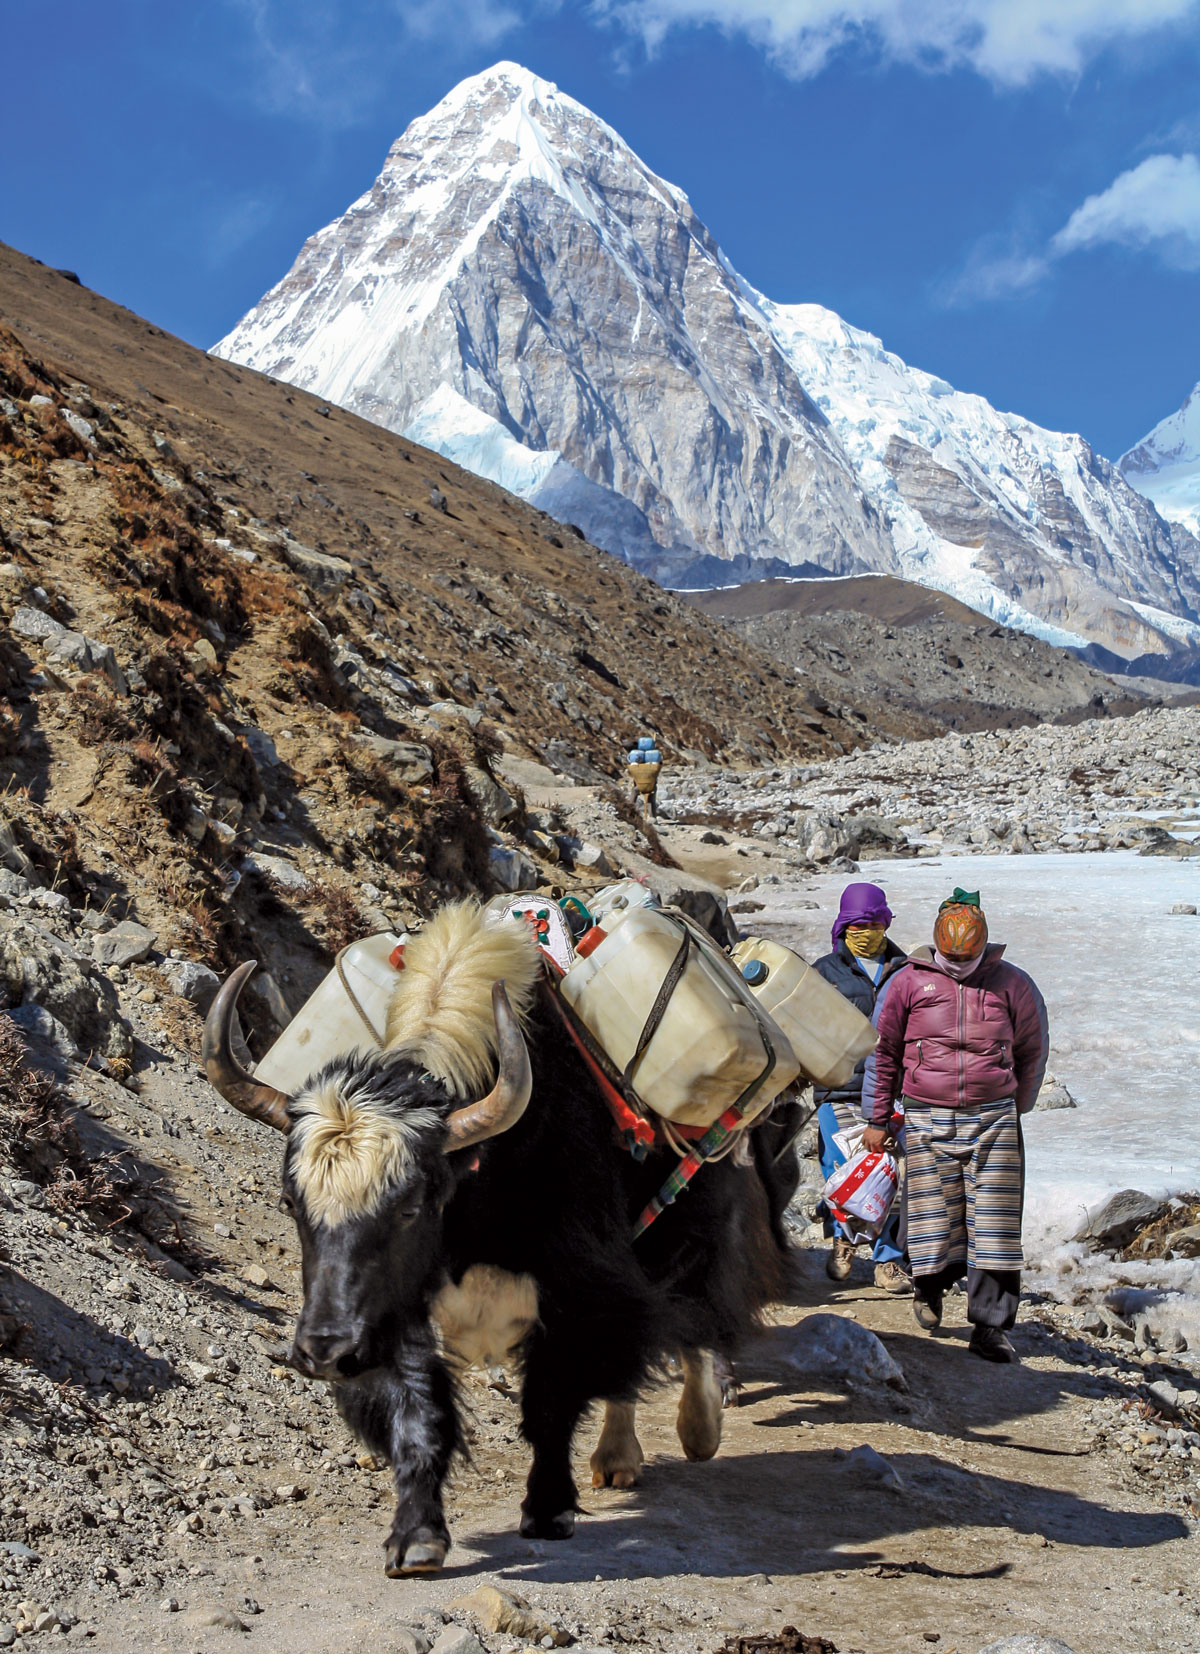 A yak bears empty water jugs near the settlement of Lobuche, with Mount Pumori, on the border between Nepal and Tibet, looming in the distance. (Alex Basaraba)